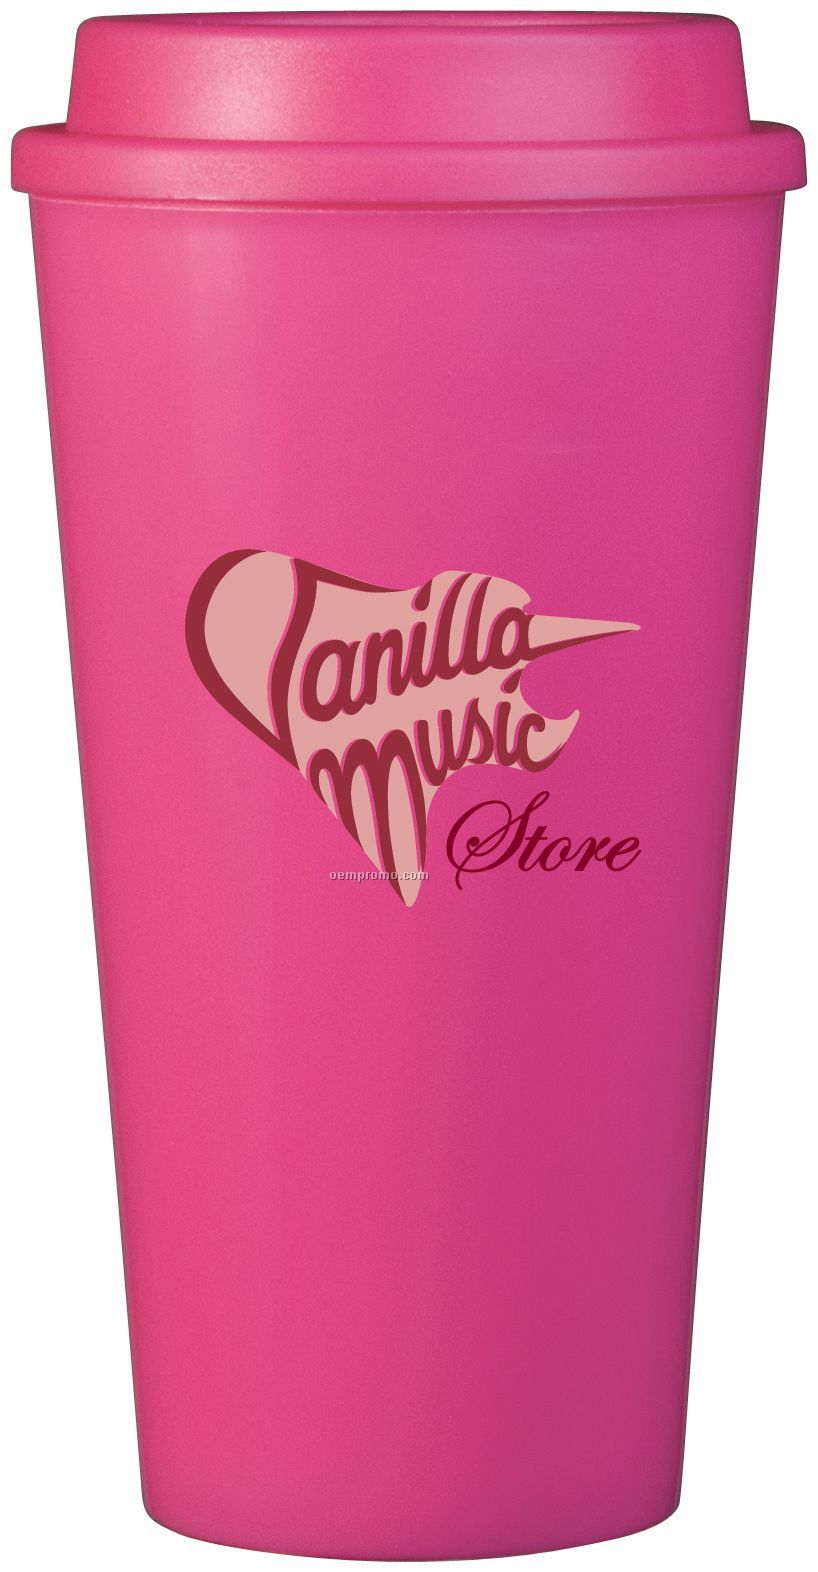 16 Oz. Pink Plastic Cup2go Cup